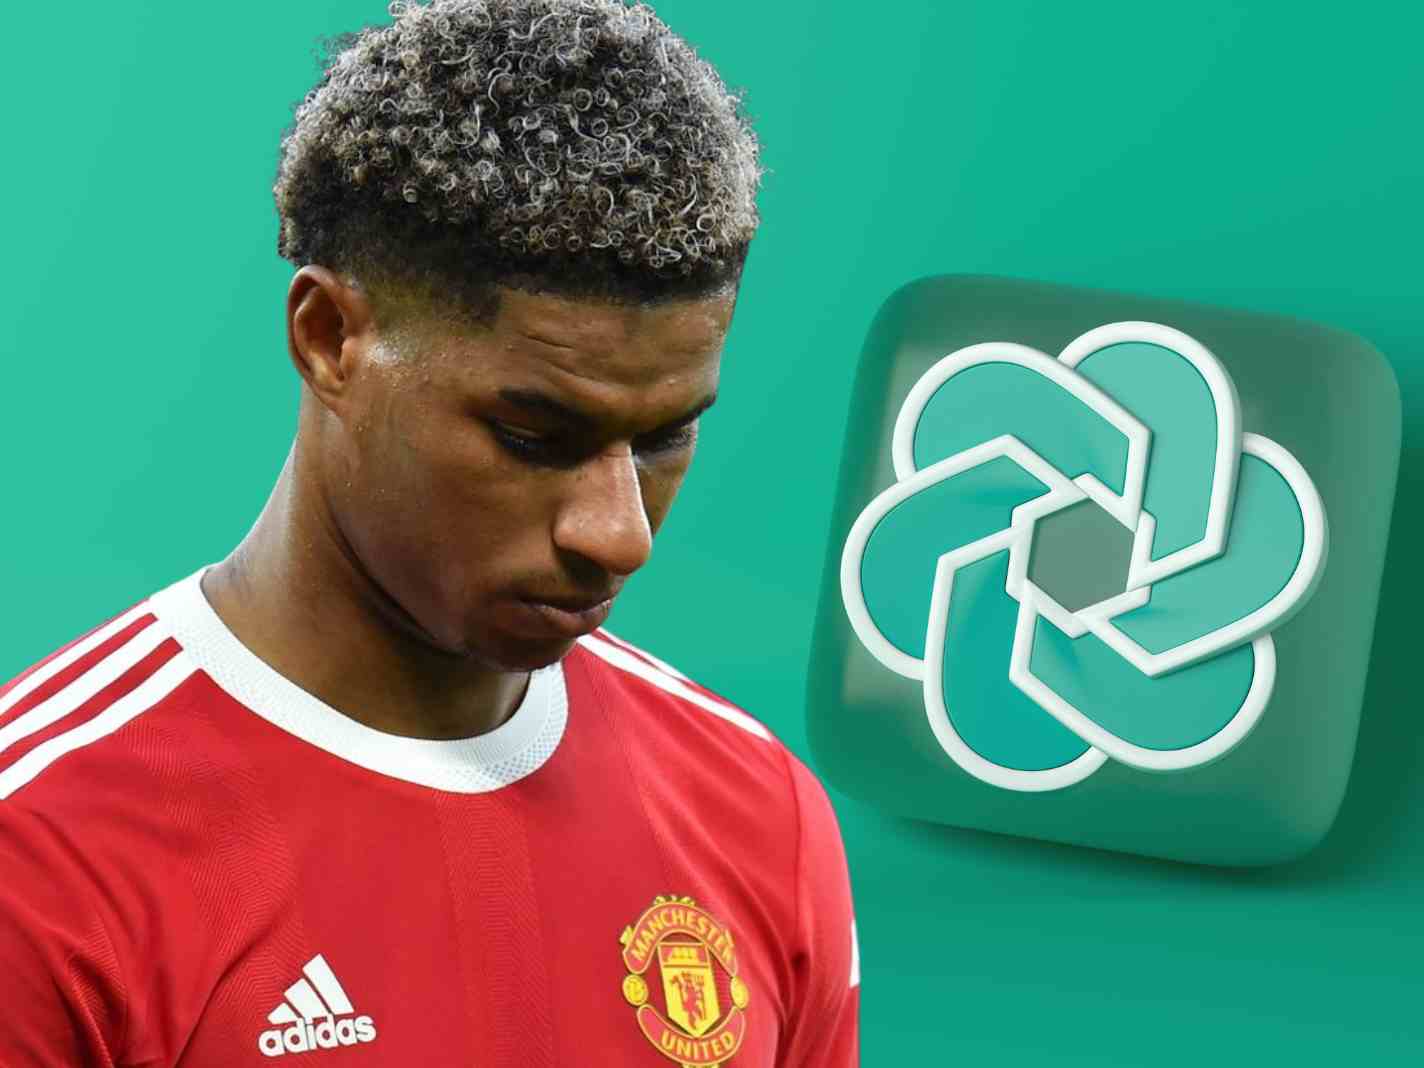 Fans convinced Marcus Rashford used ChatGPT to write his apology tweet